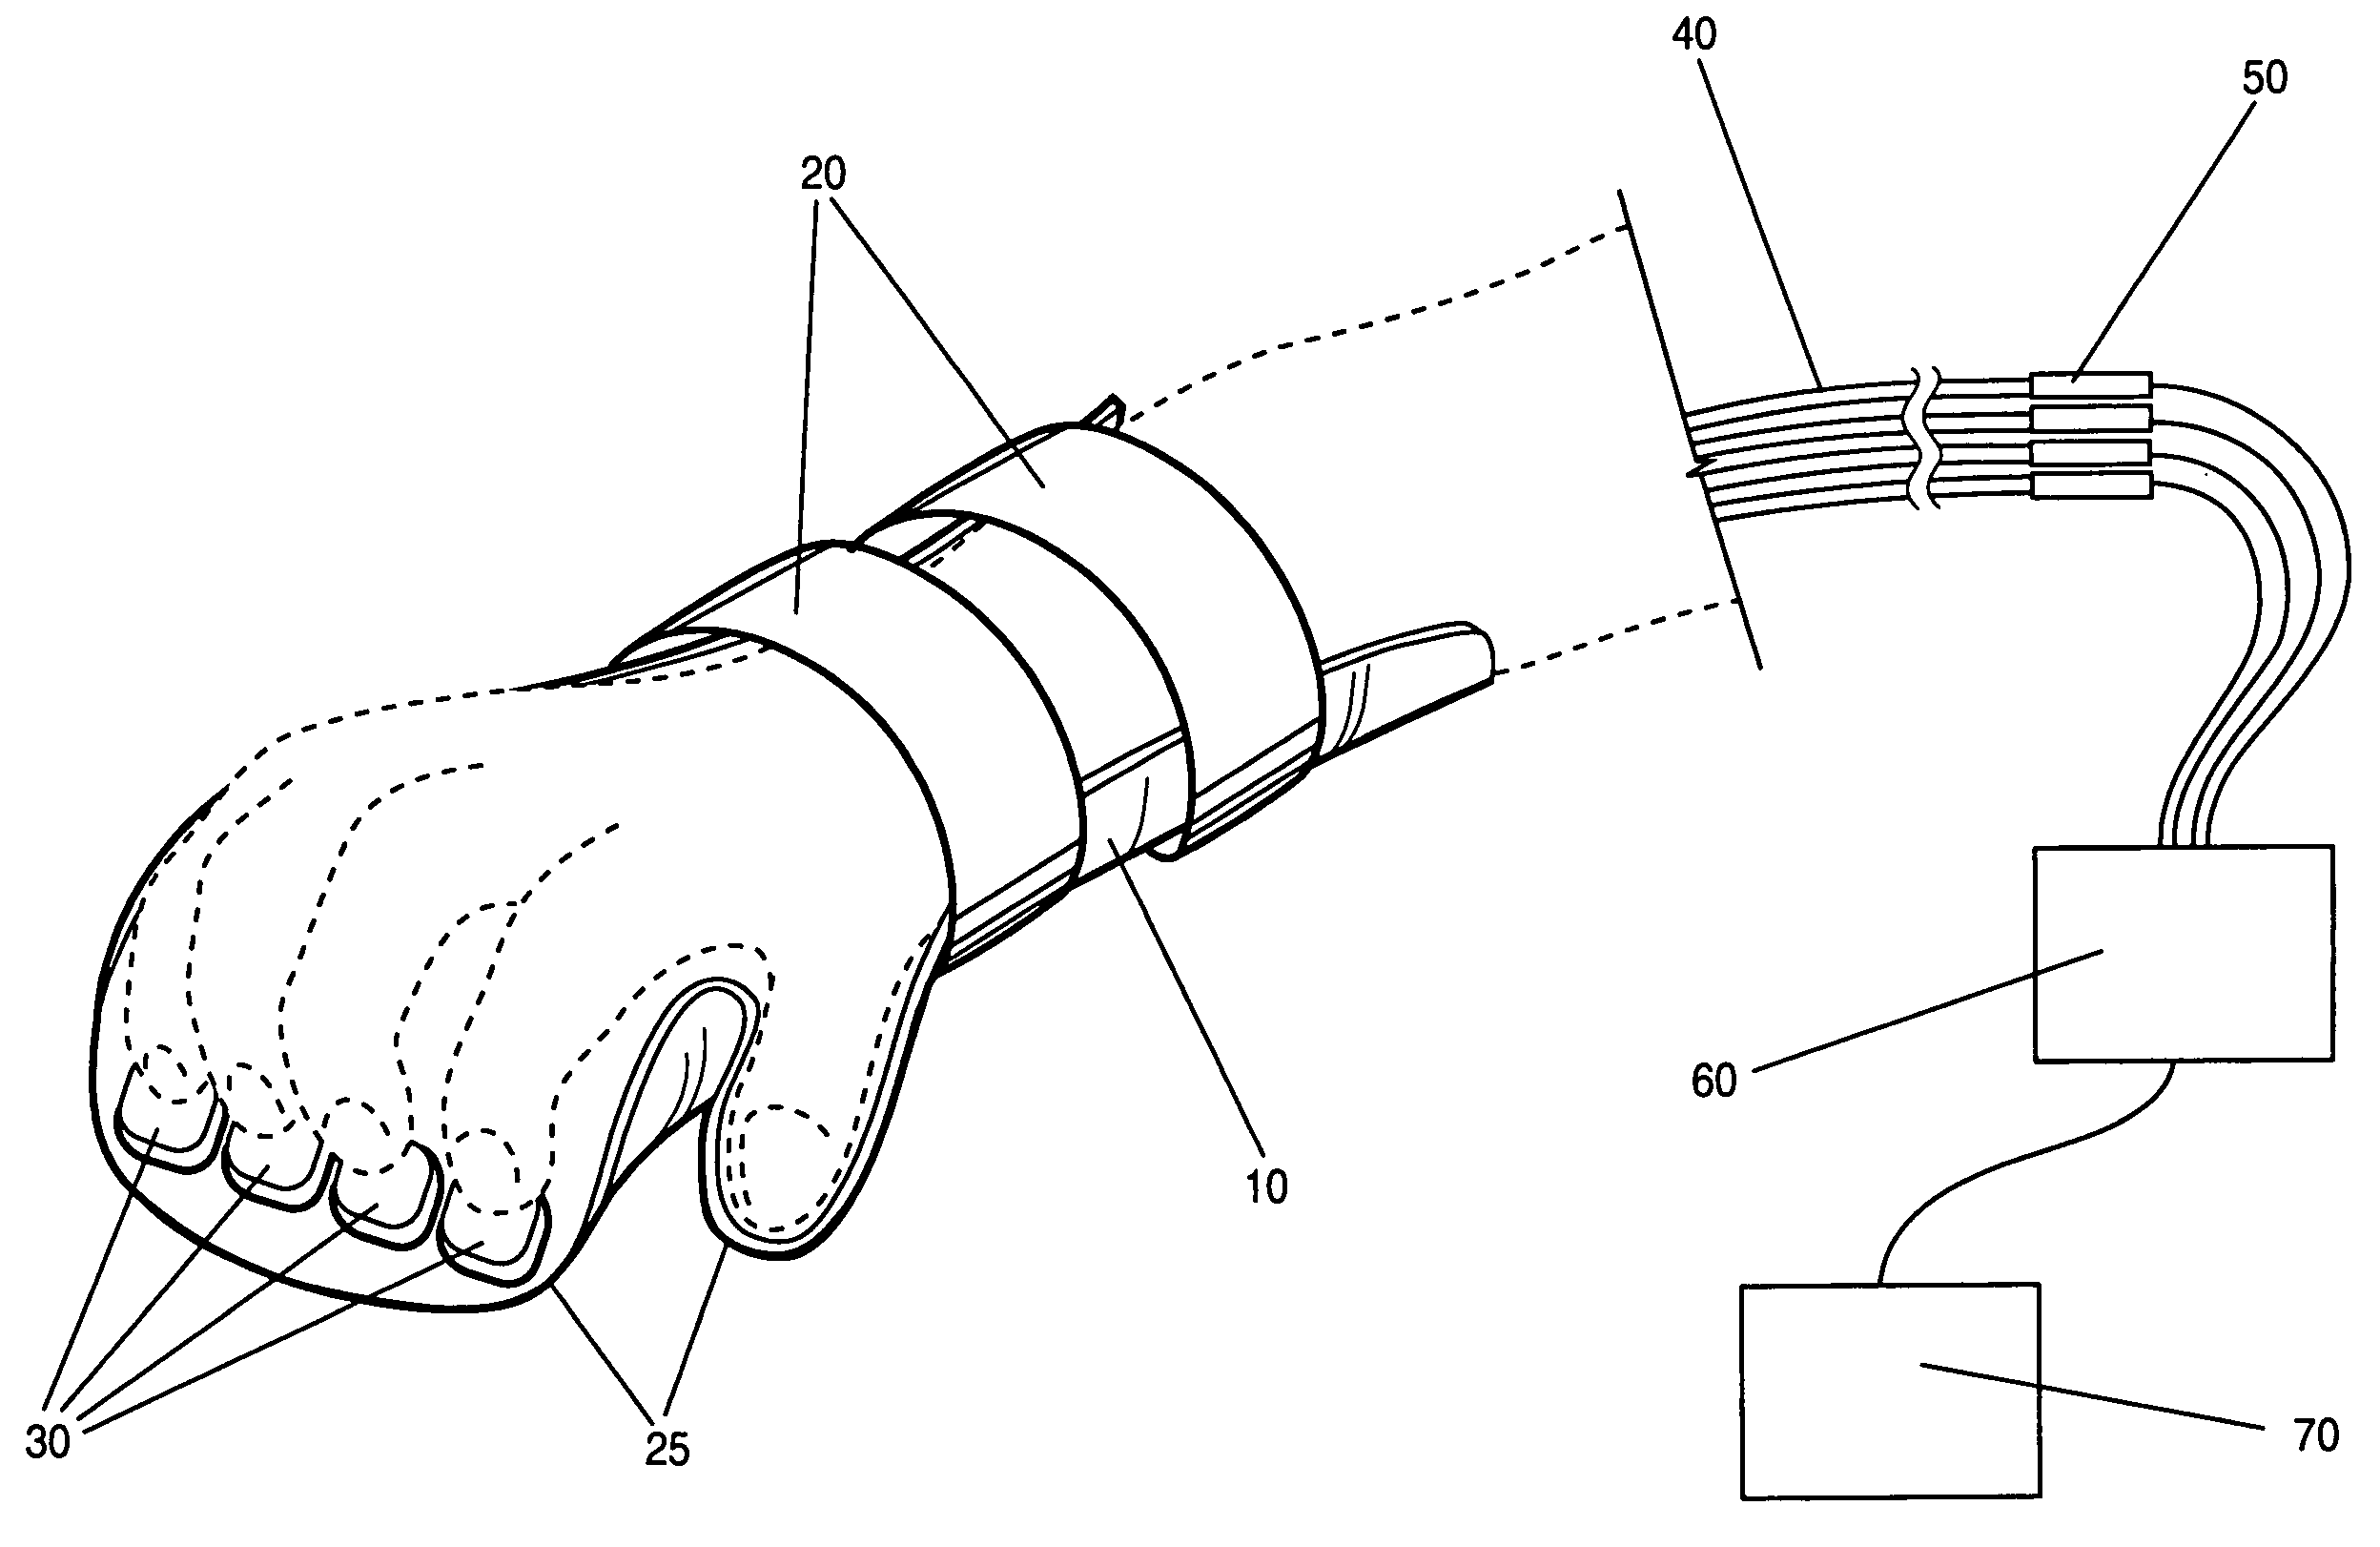 Nonmetallic input device for magnetic imaging and other magnetic field applications